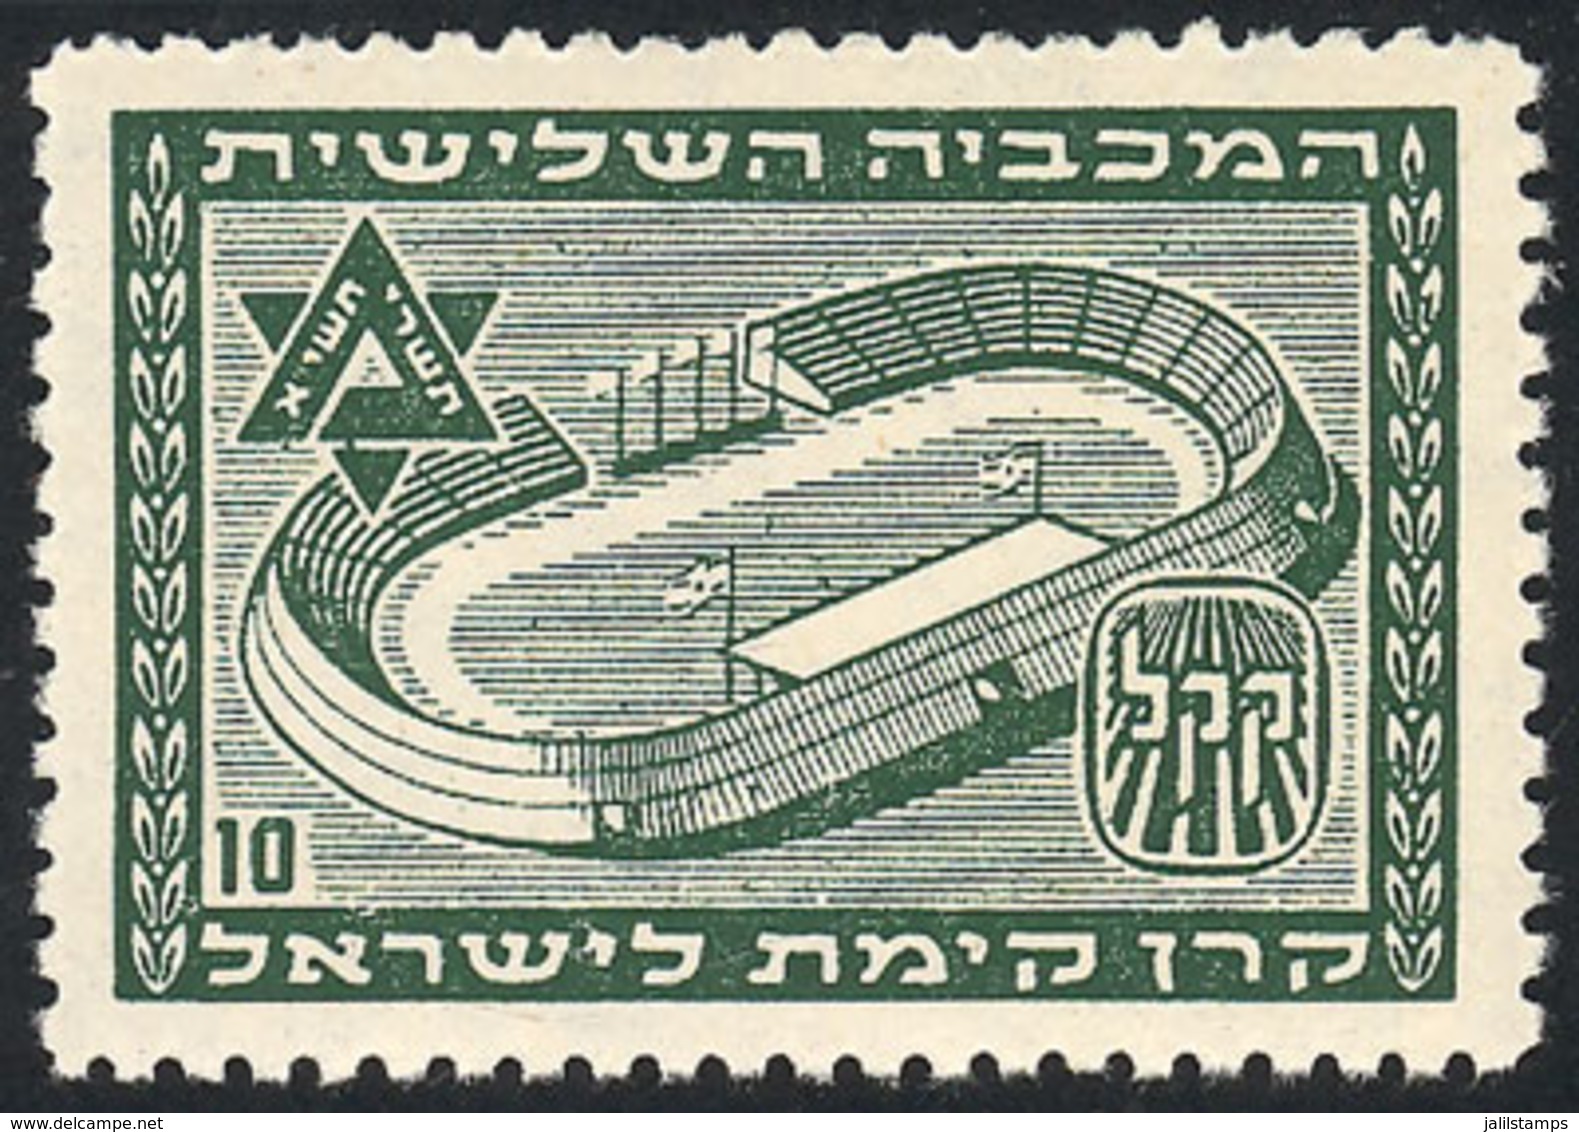 704 ISRAEL: Olympic Or Football Stadium, MNH, Excellent Quality! - Erinnophilie